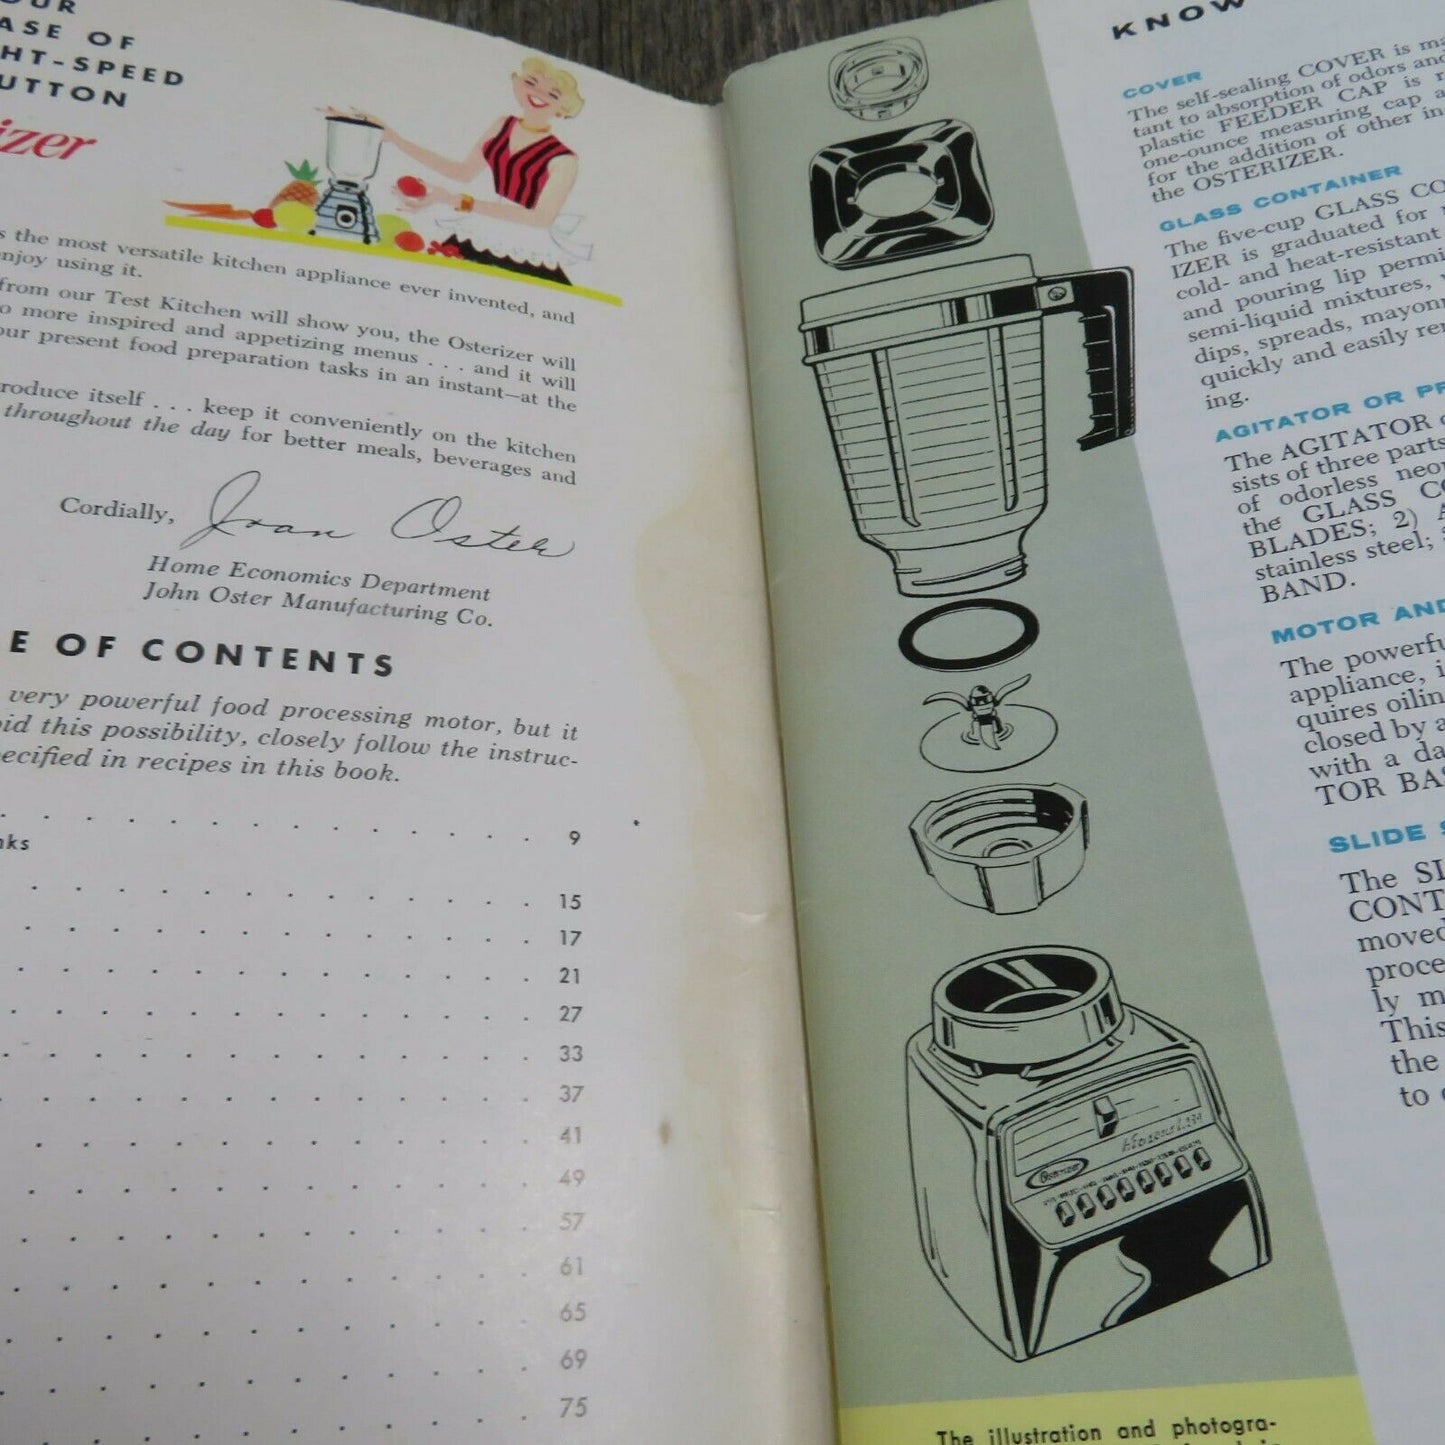 Spin Cookery Blender Cook Book 8 speed Push Button Pulse Matic Osterizer 1965 - At Grandma's Table